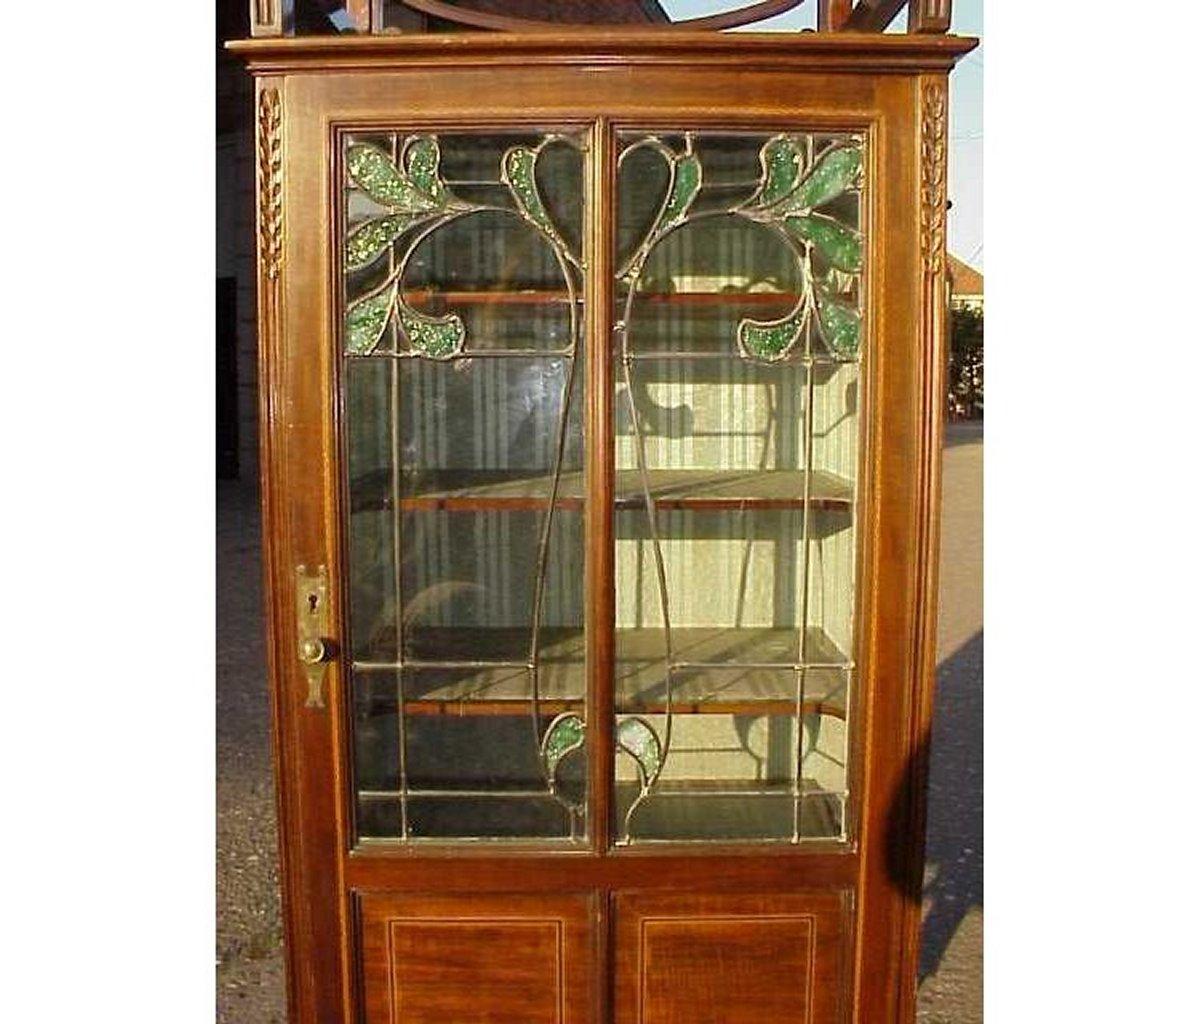 English A Petite Arts & Crafts Mahogany Display Cabinet in the Anglo-Japanese Style. For Sale